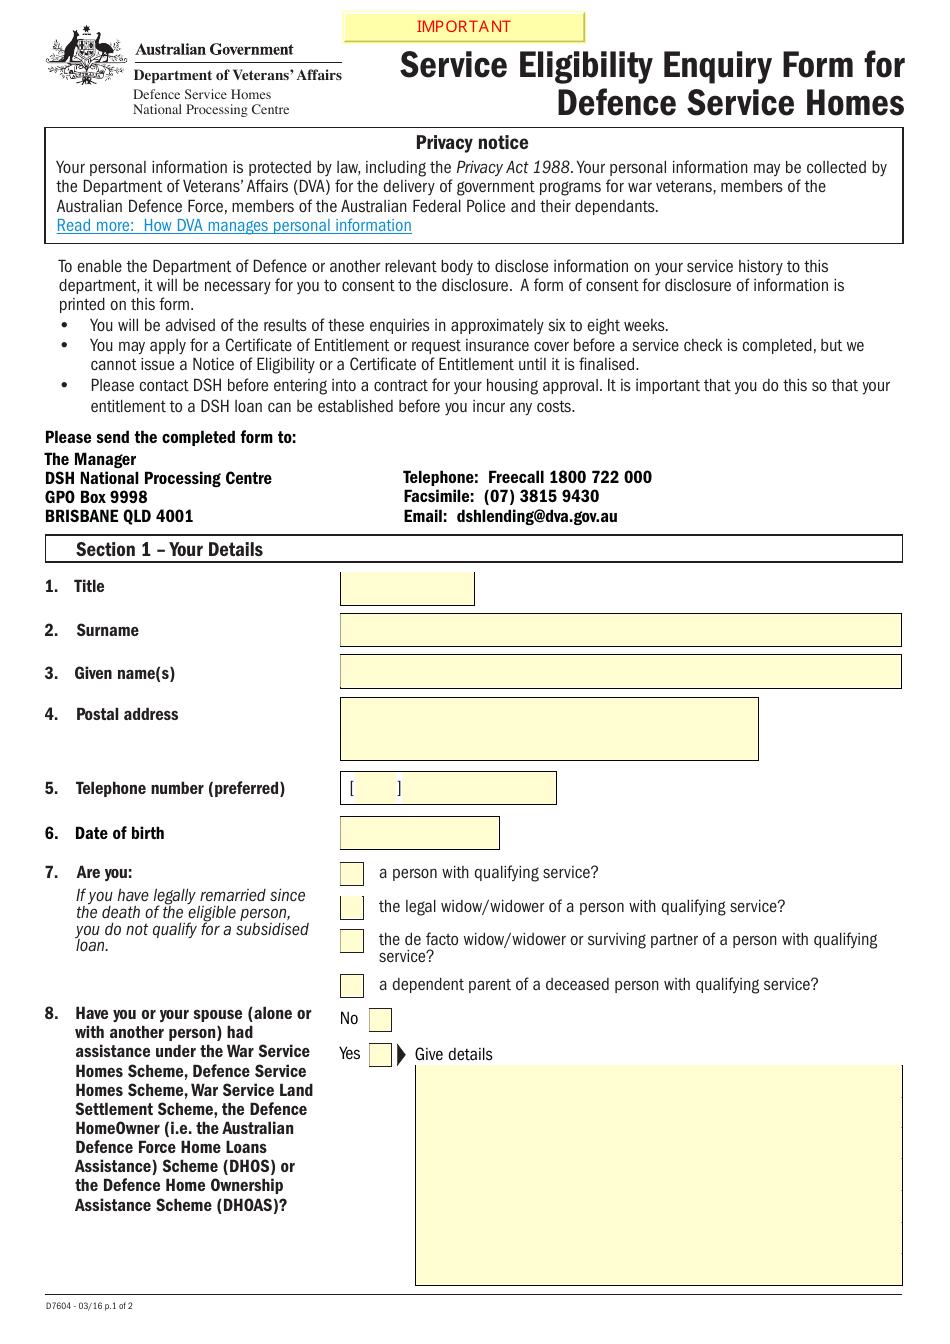 Form D7604 Service Eligibility Enquiry Form for Defence Service Homes - Australia, Page 1